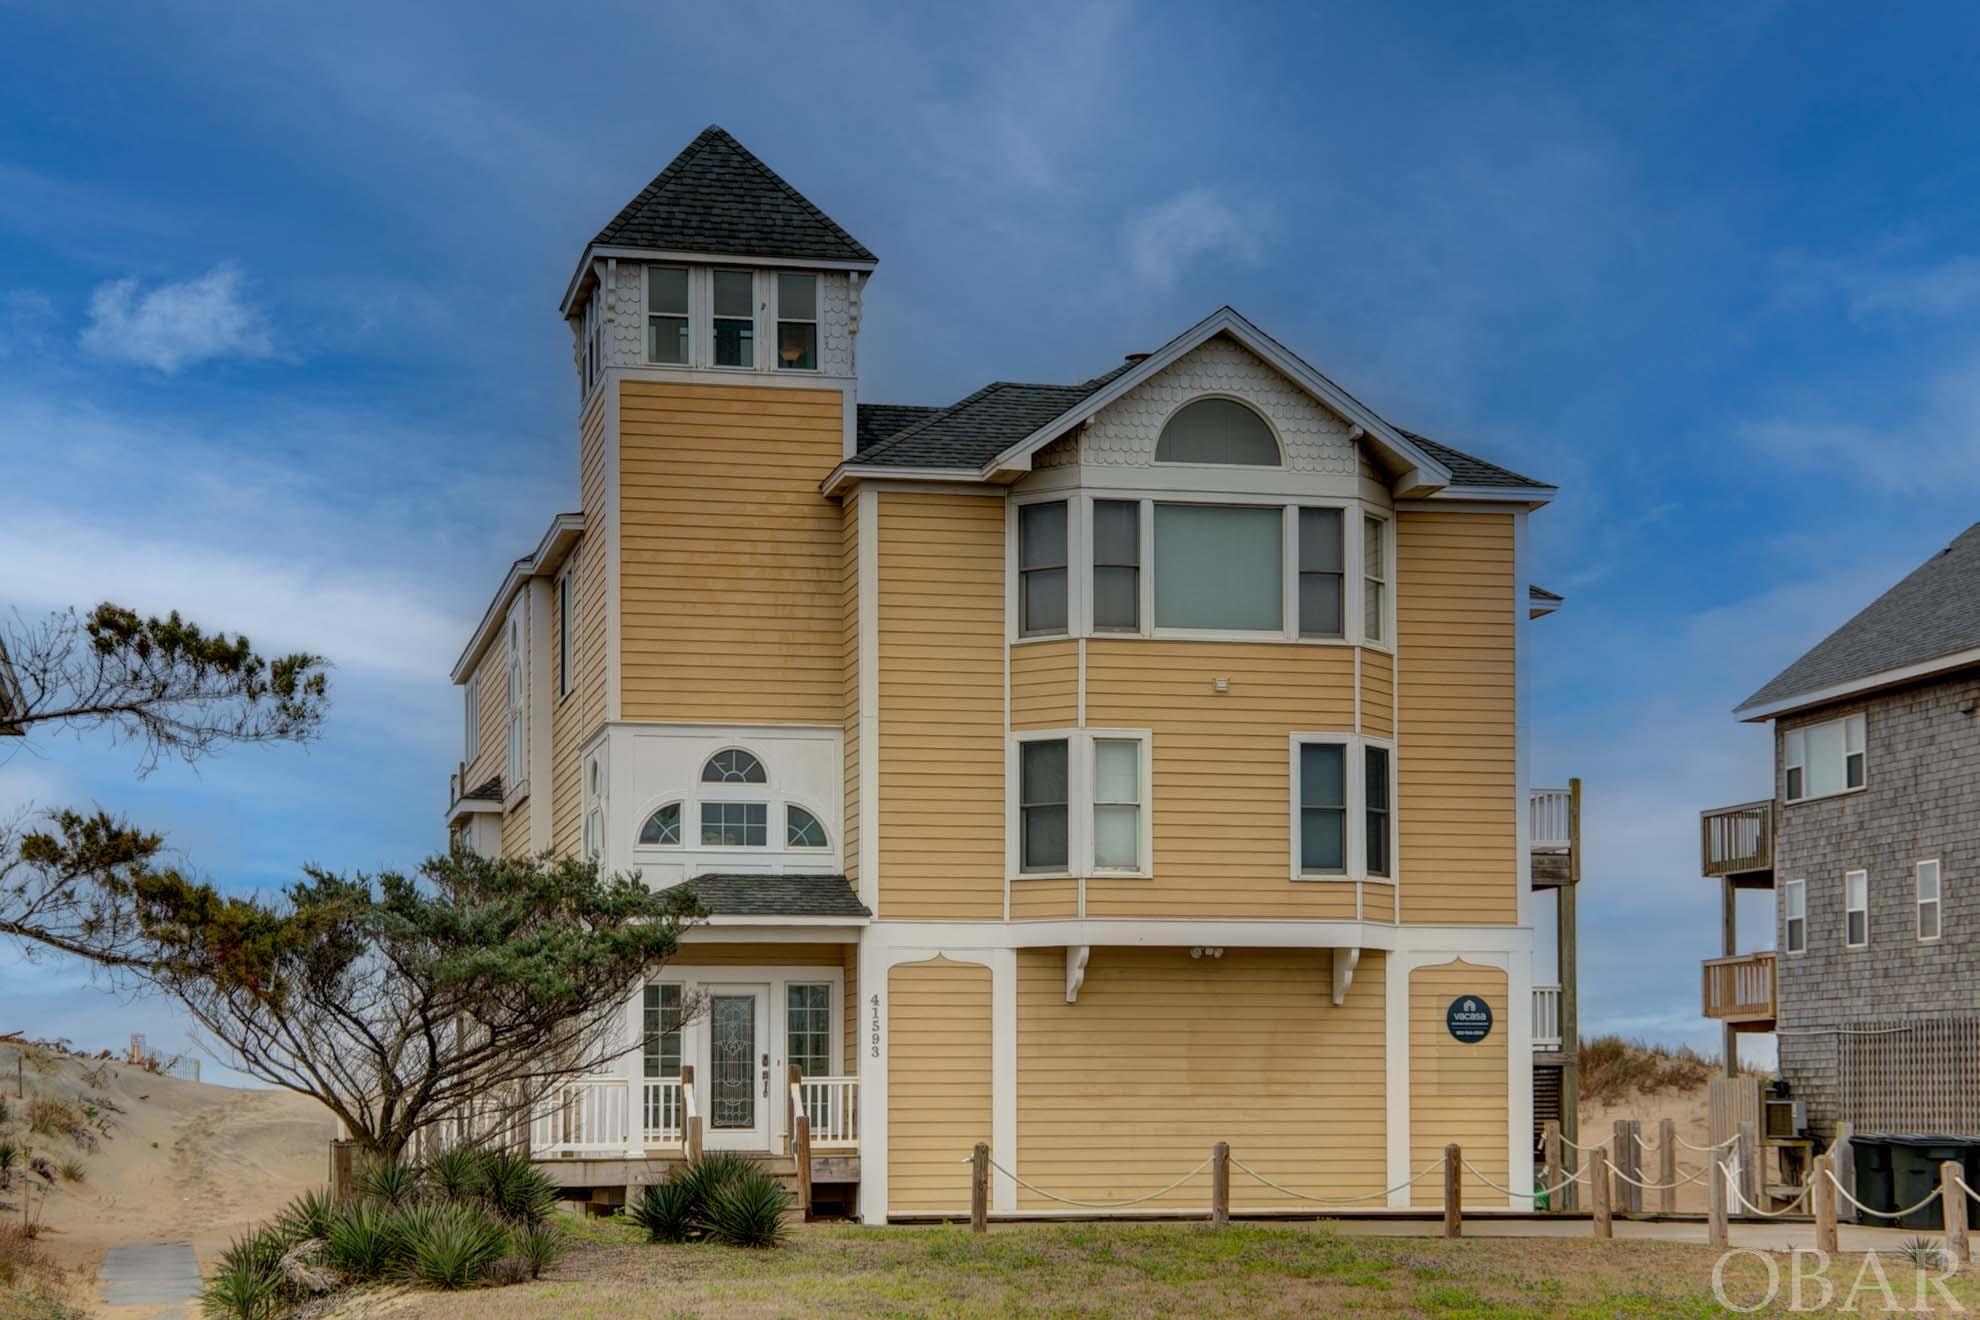 "Taj Mahatteras" is one of the most spacious oceanfront homes on Hatteras Island. There is 6,329 sf of luxurious living space on three levels connected by a winding, floating oak staircase and a glass elevator. Taj offers 7 Ensuites and 2 half baths. On the top level you will find a 1,600 sf great room with a gourmet kitchen, a dining room that comfortably seats all, a huge living room with a see through gas fireplace to an elevated gathering area ideal for putting together puzzles, playing cards or having breakfast with a sunrise view. There are 2 Ensuites on this level. The 2nd level is home to 5 Ensuites (2 that have gas fireplaces and ocean facing decks). The 8 person hot tub with an ocean view is also on this level. On the first level you'll find a second living room with a pool table and wet bar and another activity area with a home theater room; sauna; shuffleboard and various game tables. This home also offers a private inground swimming pool. You'll never feel crowded or bored at Taj MaHatteras, making this property a very desirable vacation destination which equals a wonderful investment opportunity.